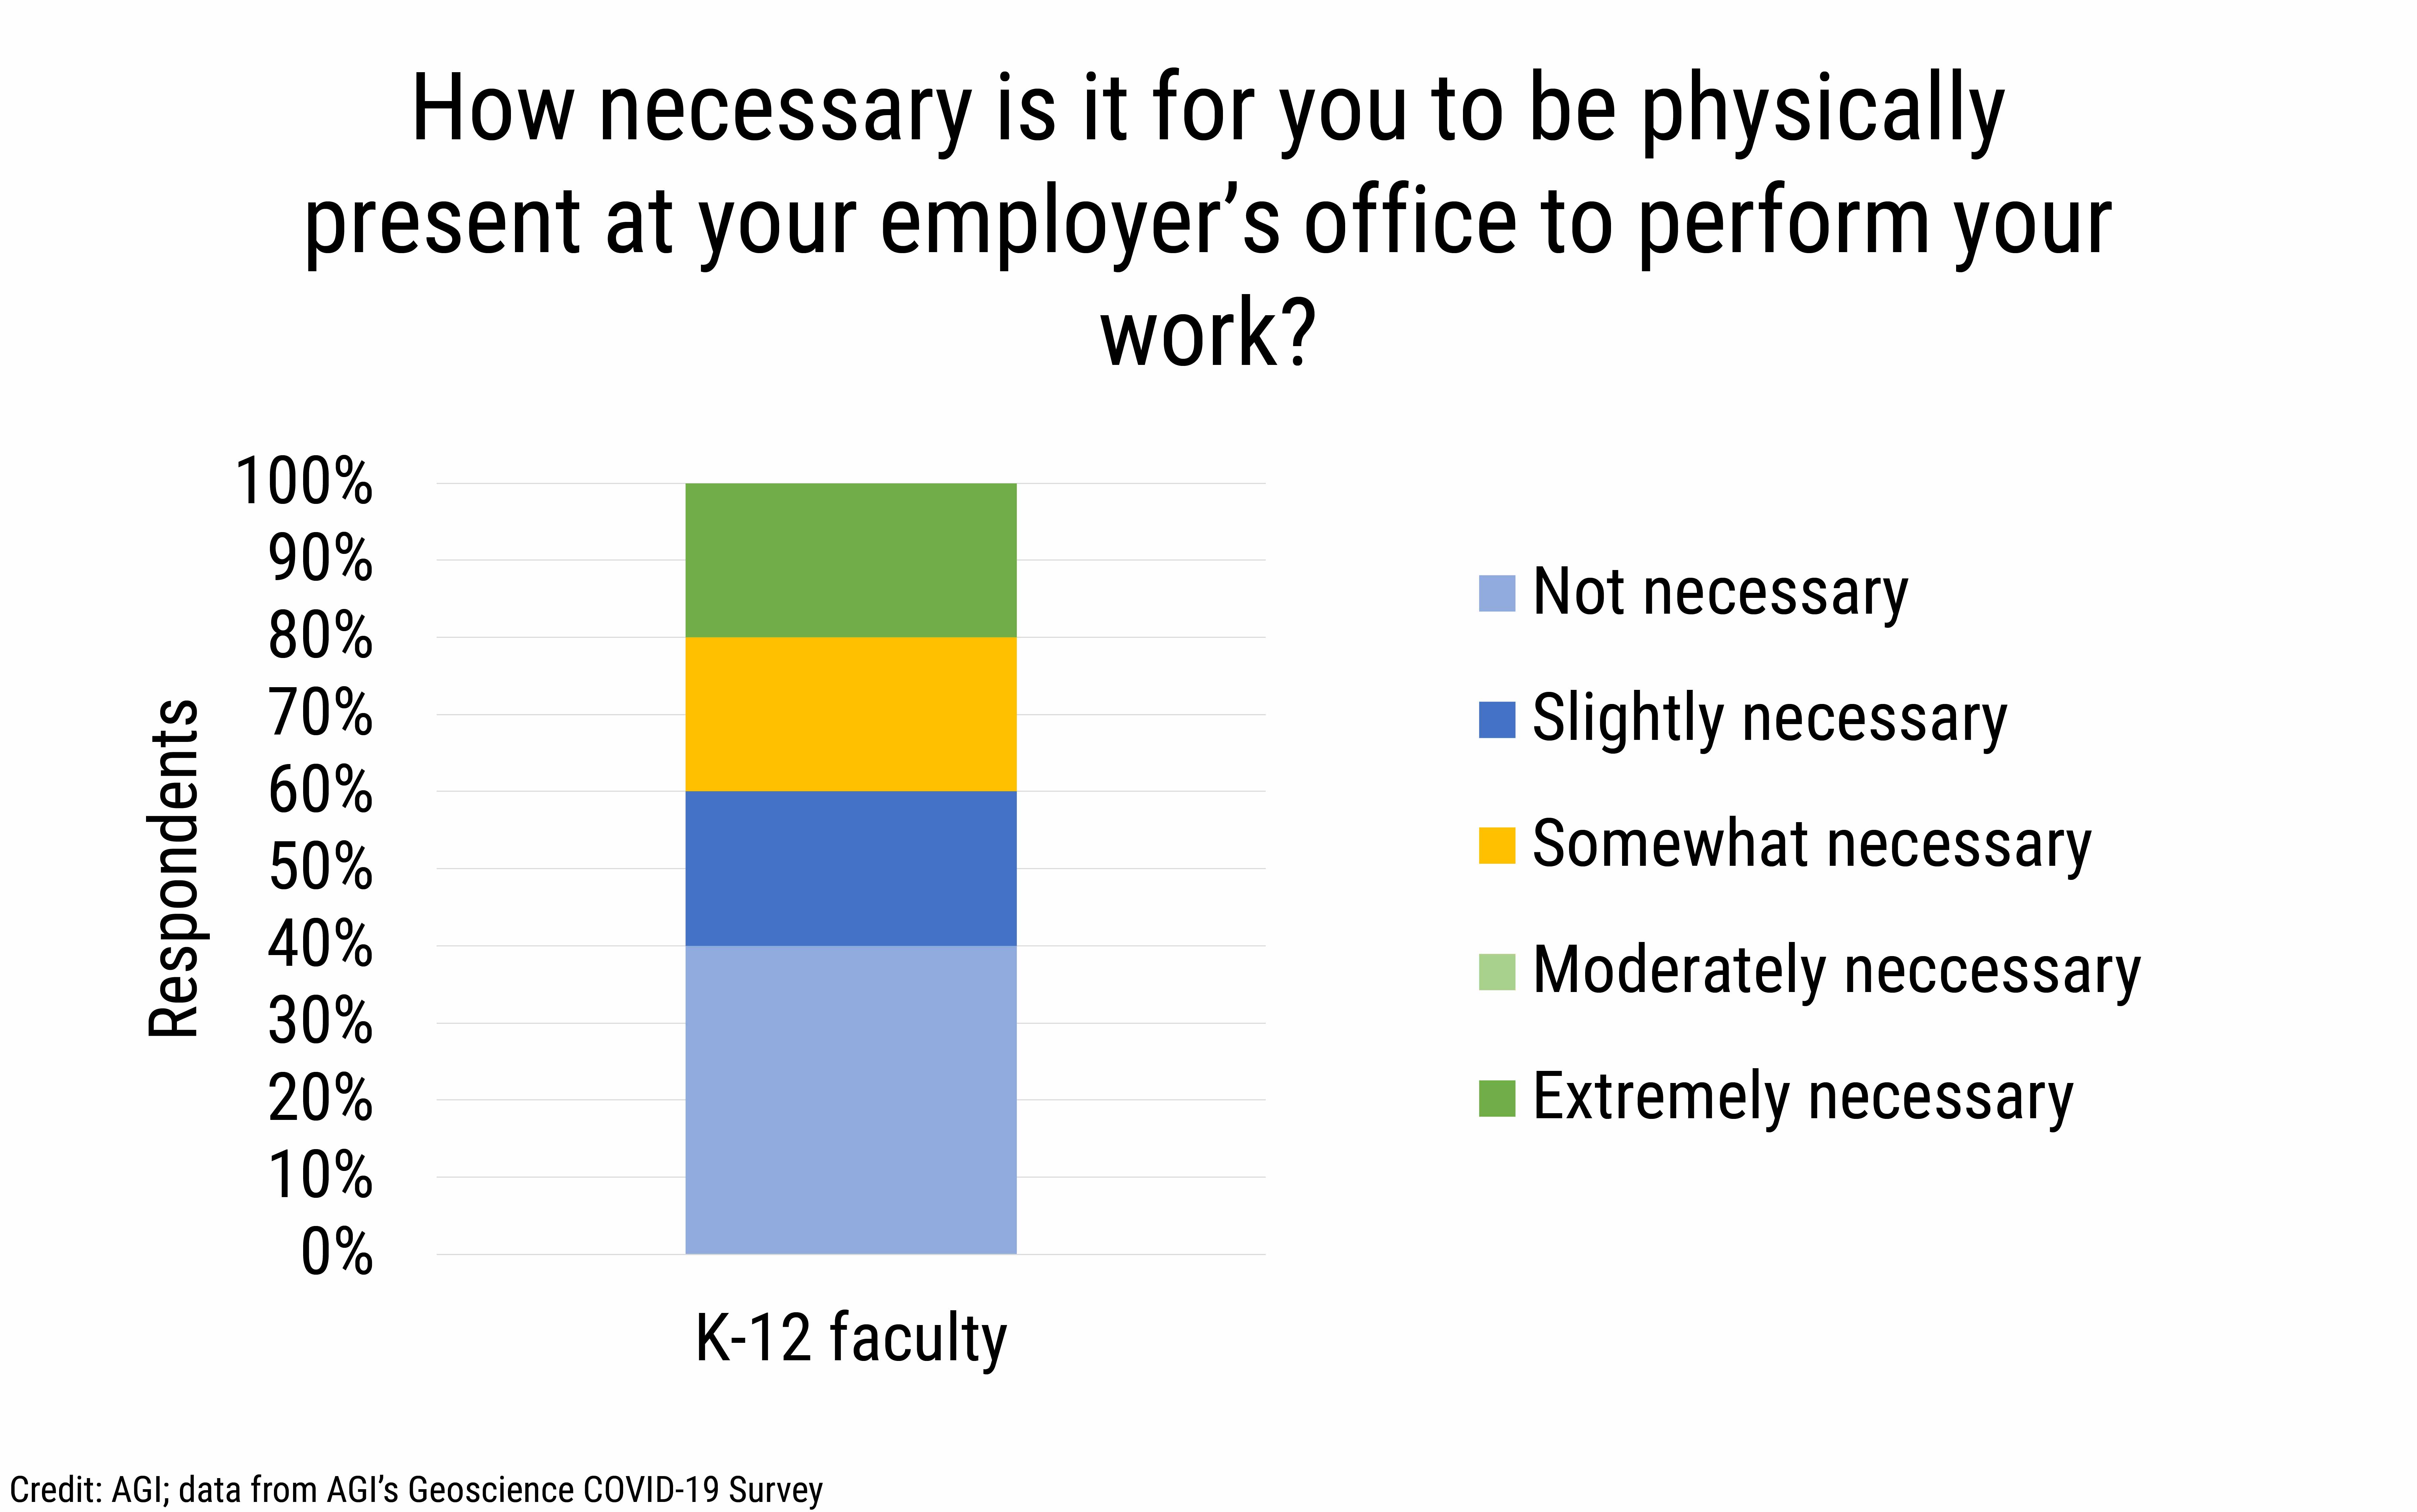 DB_2021-013 chart 02: How necessary is it for you to be physically present at your employer’s office to perform your work? (Credit: AGI; data from AGI&#039;s Geoscience COVID-19 Survey)